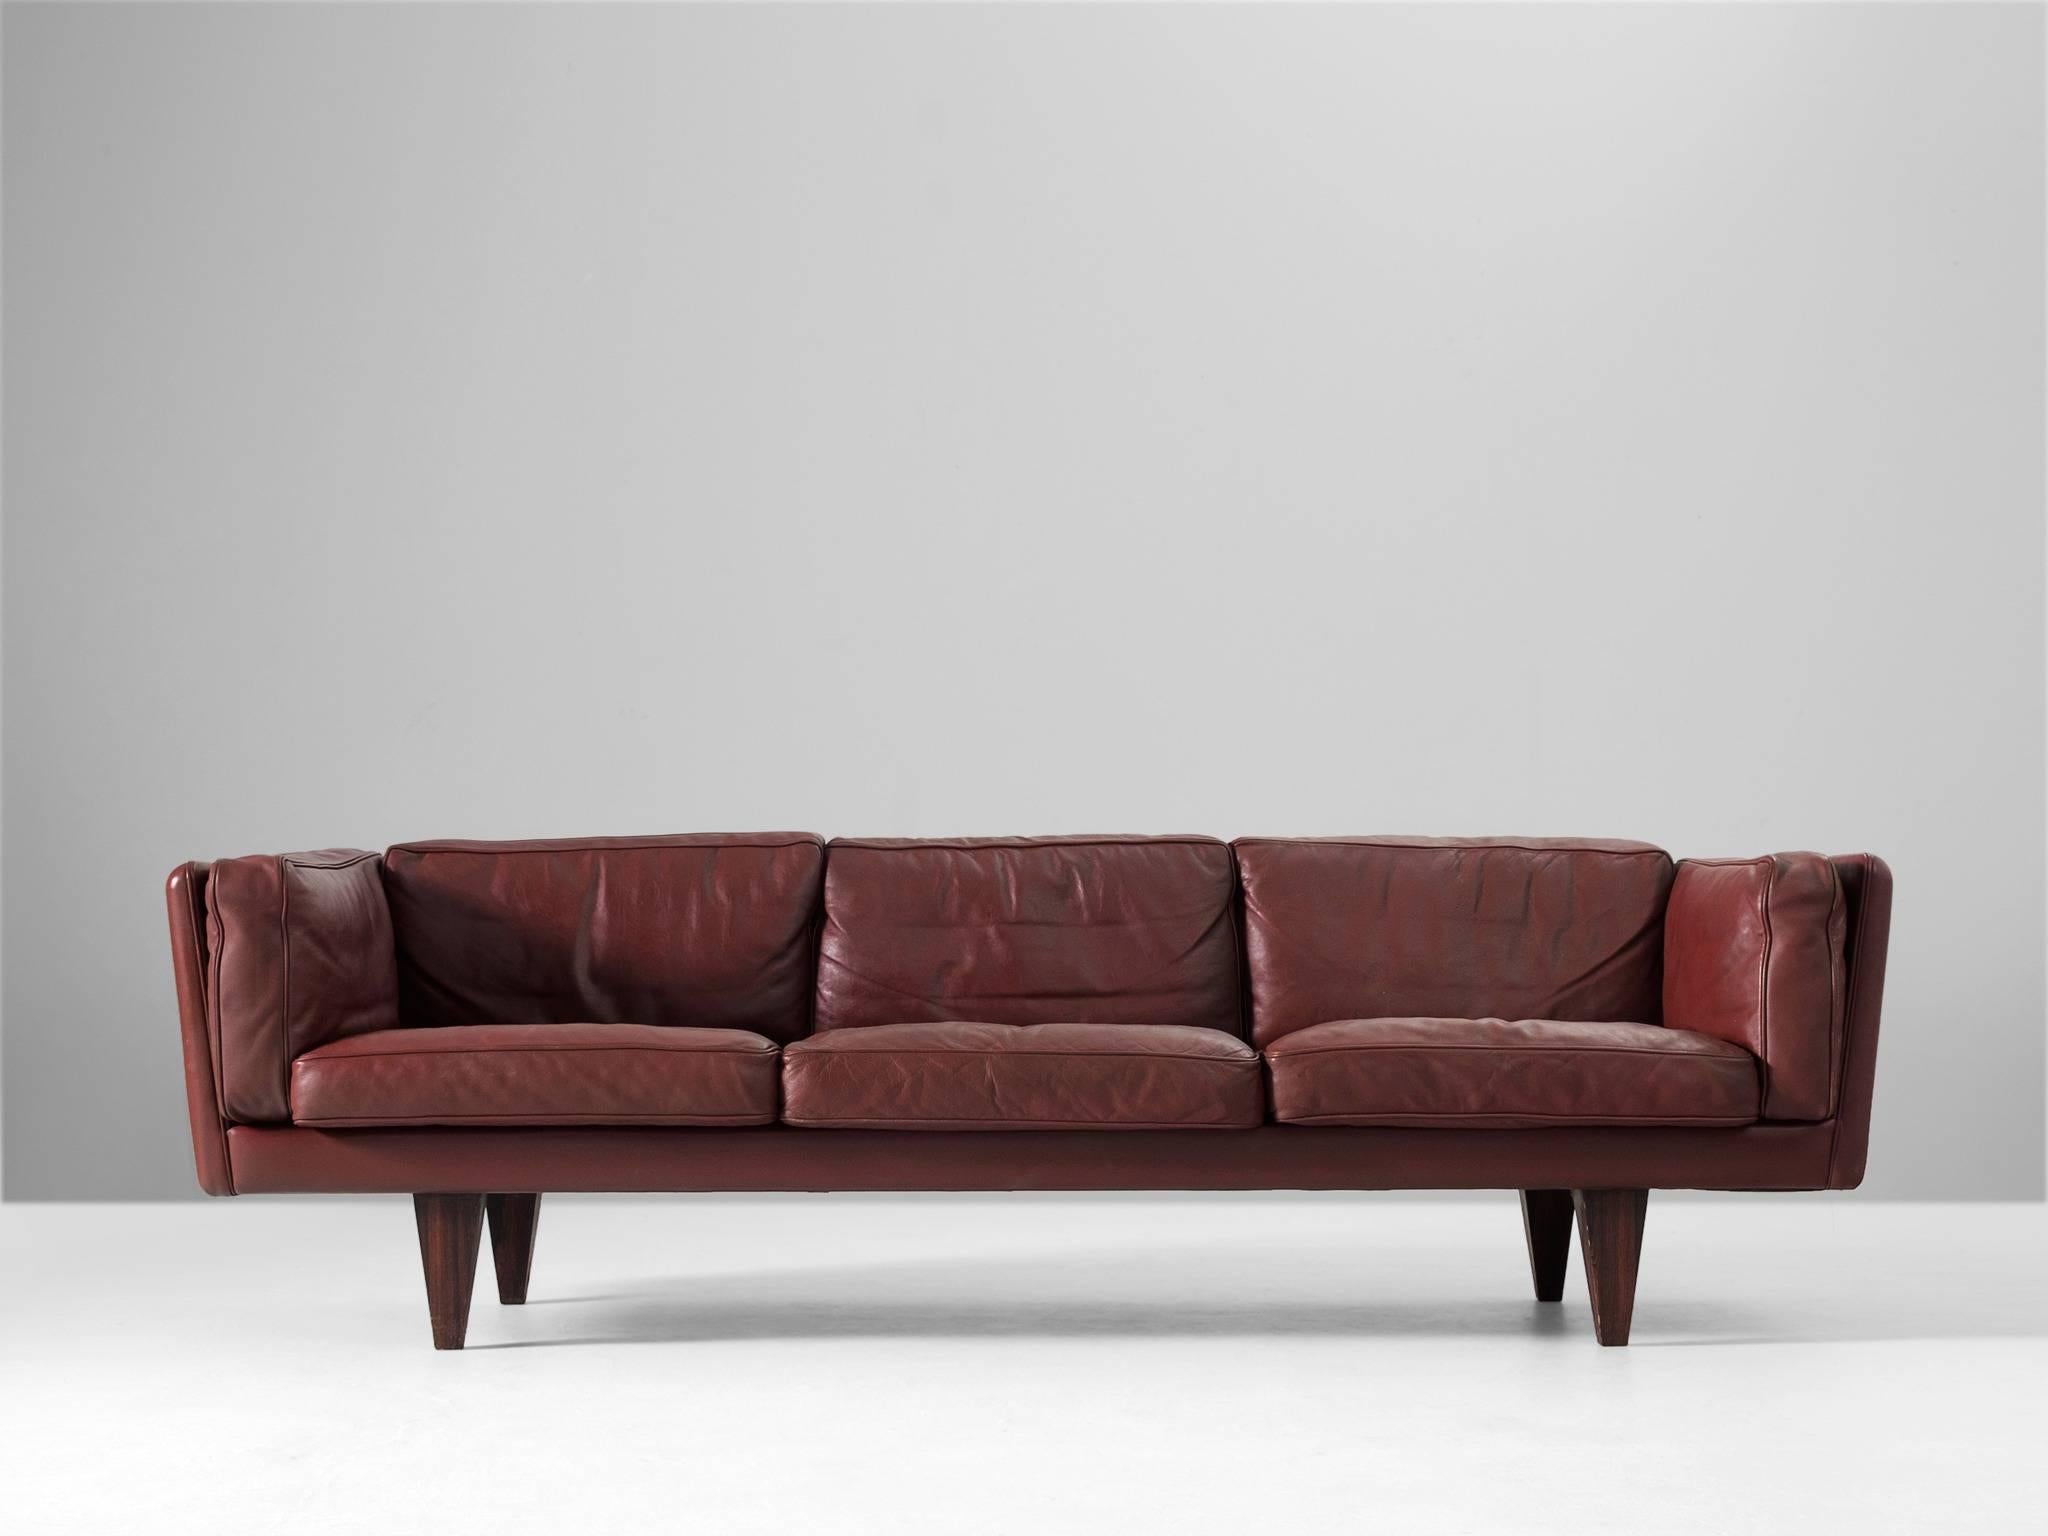 Sofa model V11, in leather and rosewood, by Illum Wikkelso, Denmark 1960s.

Stunningly three-seat sofa, designed by Danish designer Illum Wikkelsø. The original dark red high quality leather is in magnificent condition. This model is highly rare